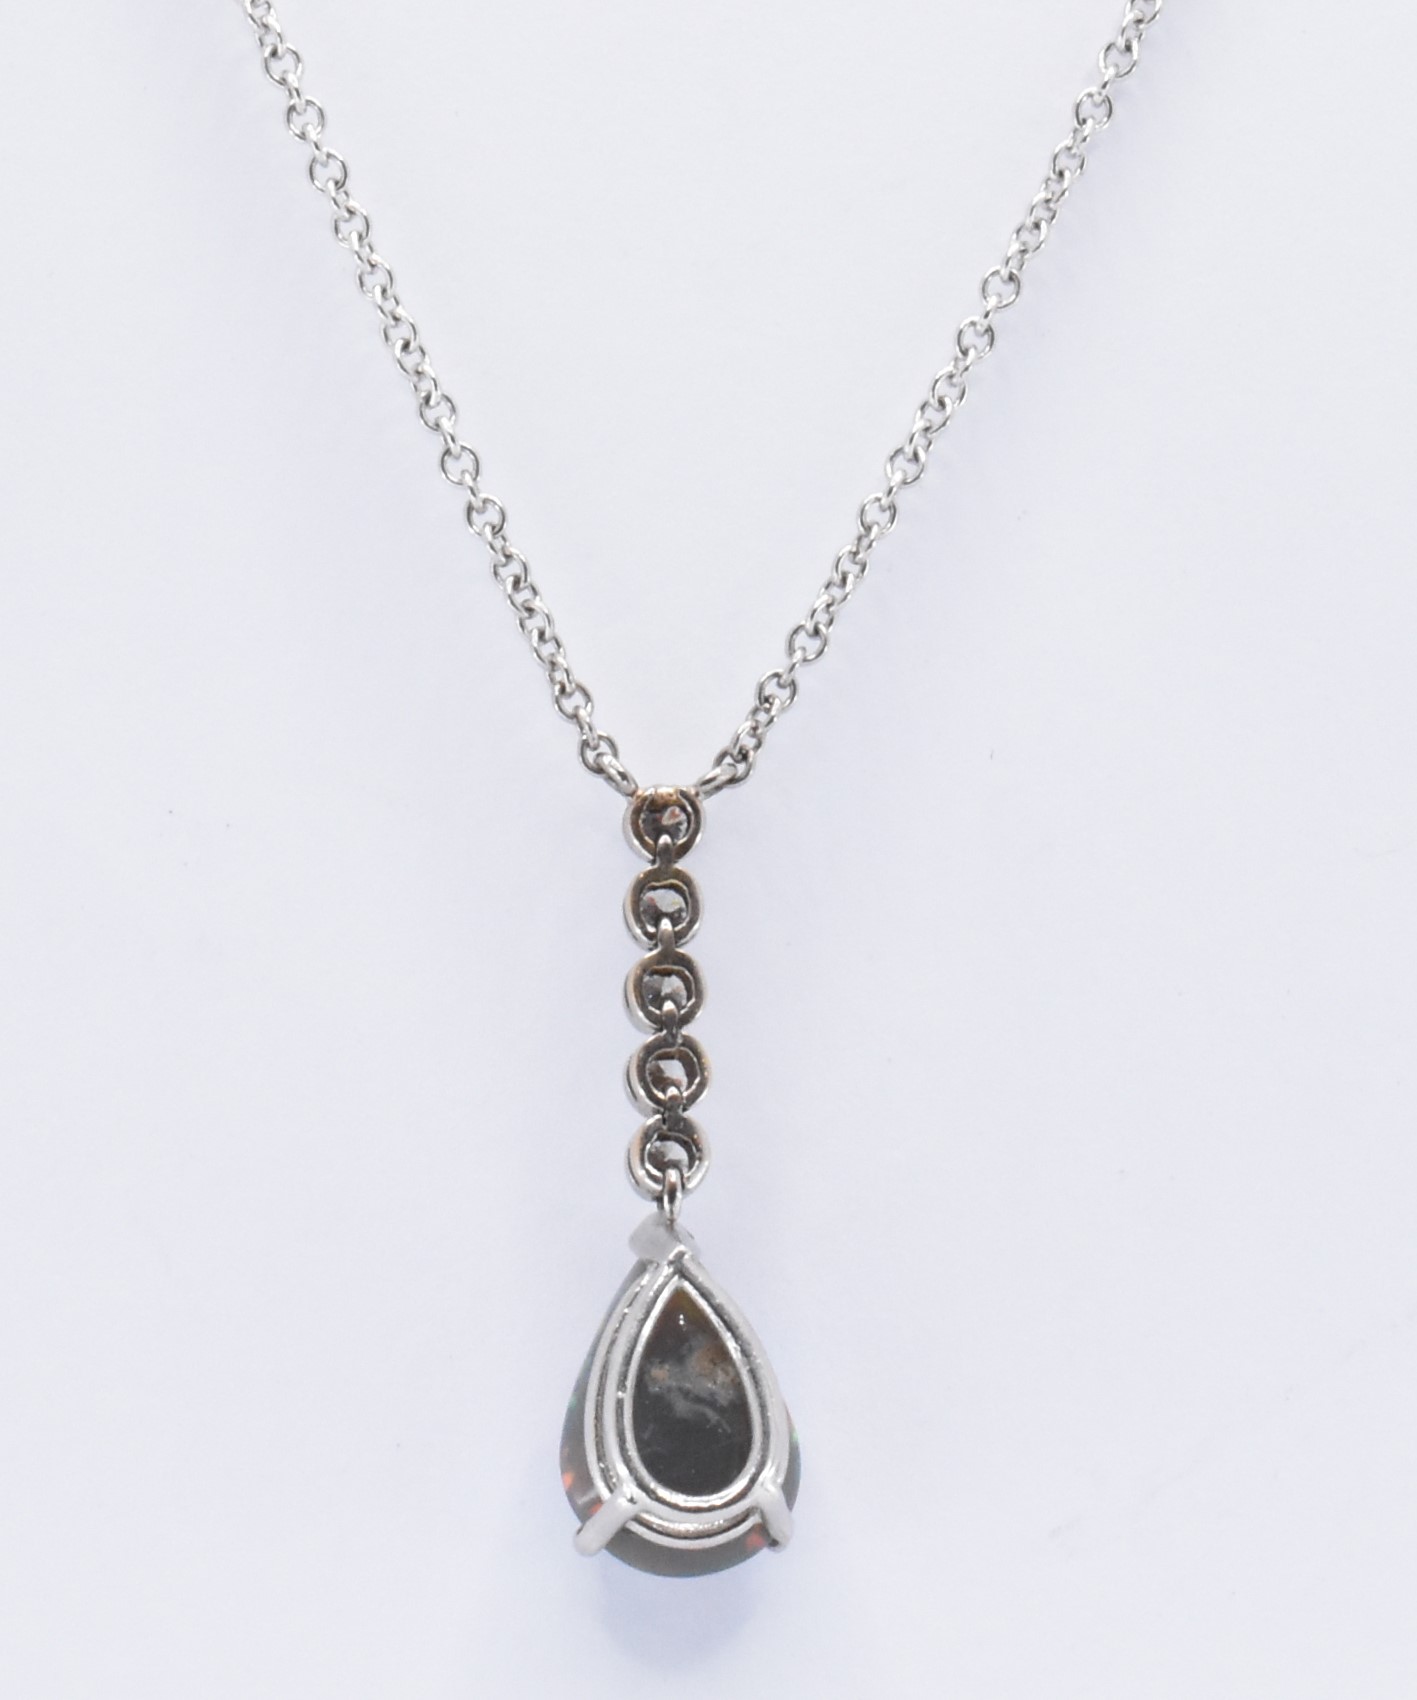 18CT WHITE GOLD OPAL & DIAMOND PENDANT NECKLACE - Image 7 of 8